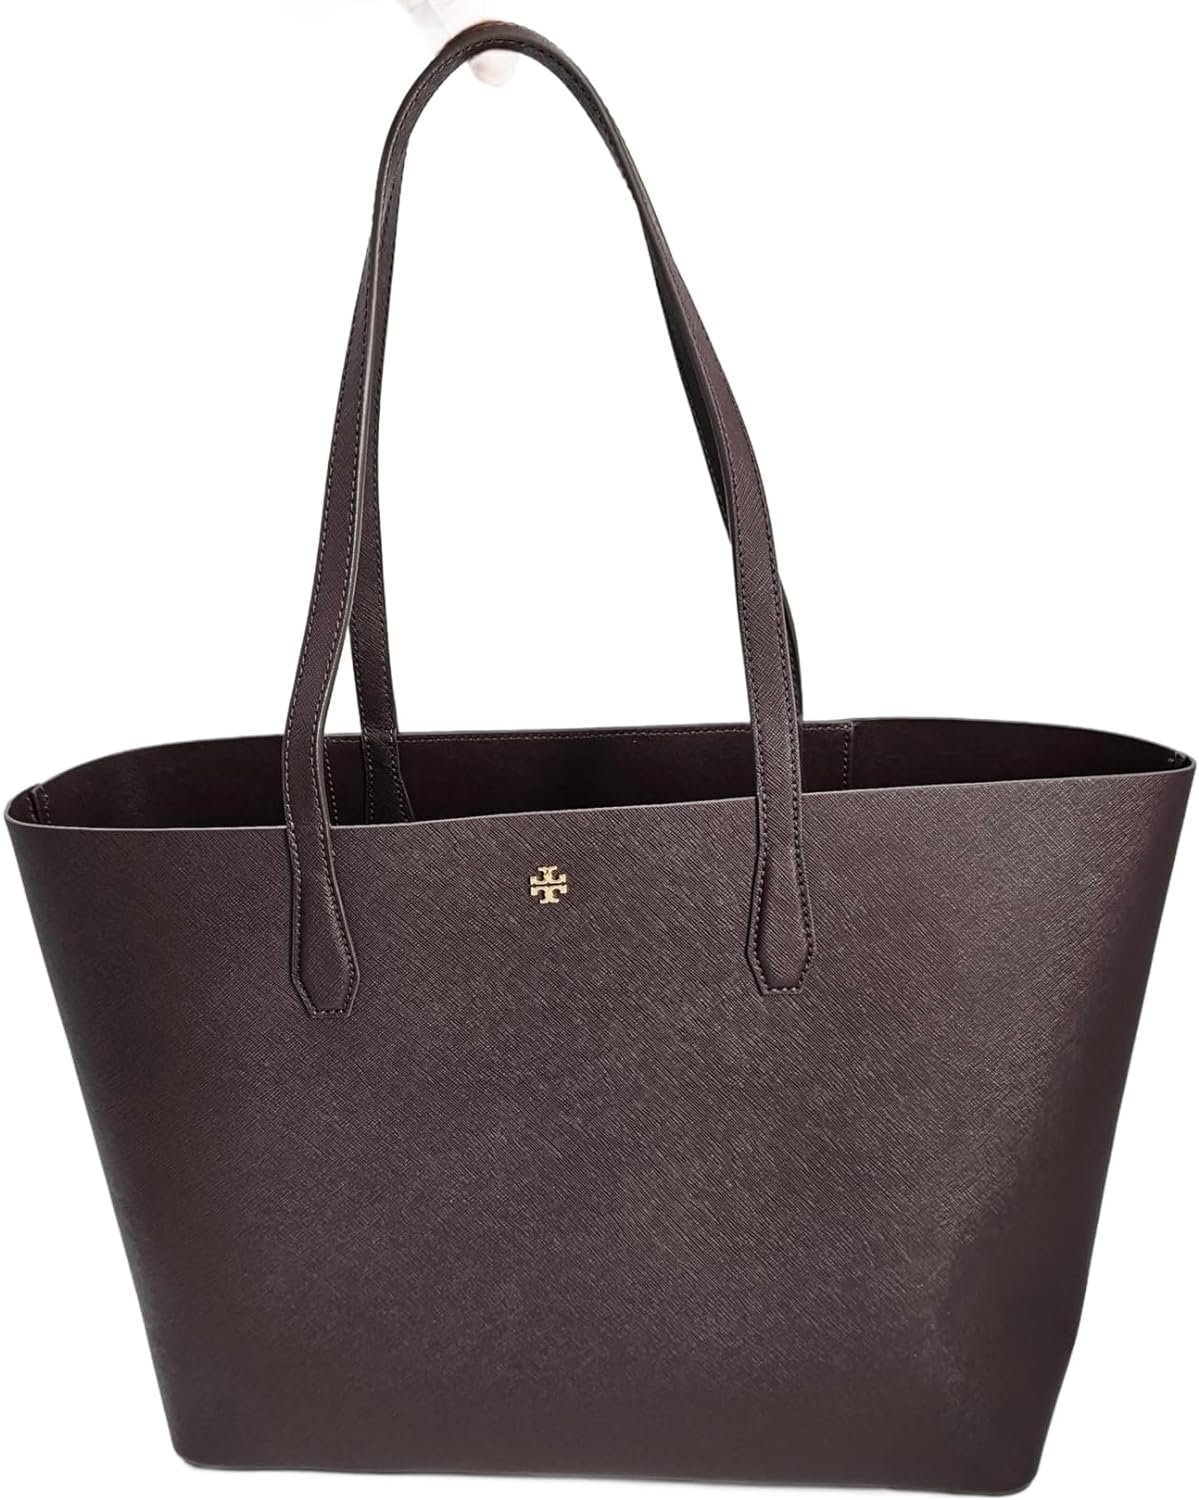 Tory Burch 154319 Blake With Gold Hardware Saffiano Leather Womens Large Tote Bag